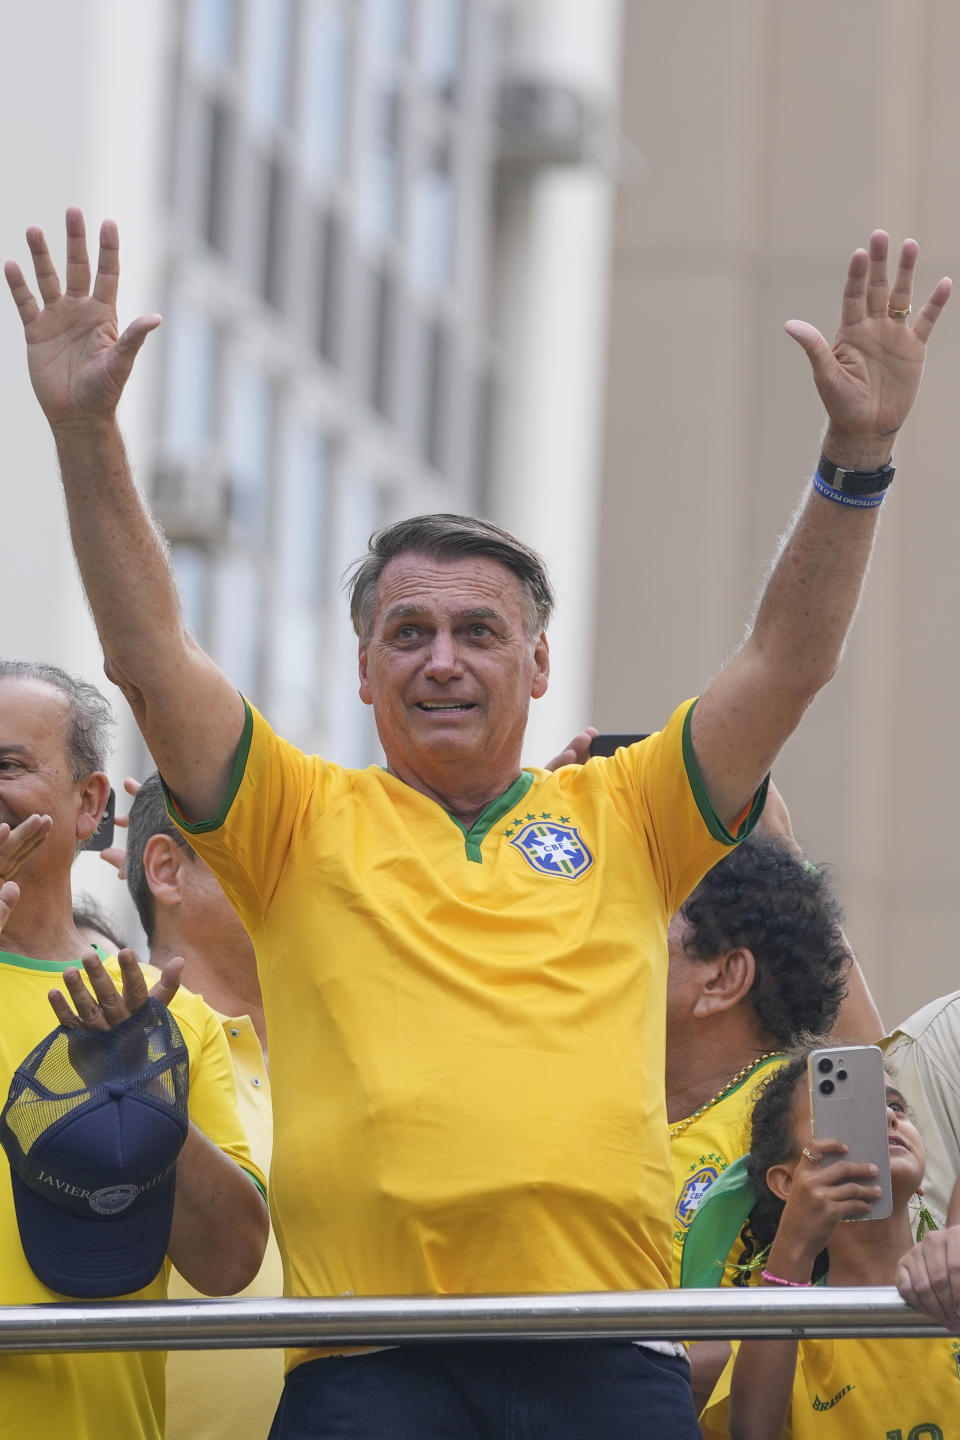 Former President Jair Bolsonaro addresses supporters during a rally in Sao Paulo., Brazil, Sunday, Feb. 25, 2024. Bolsonaro and some of his former top aides are under investigation into allegations they attempted plotted a coup to remove his successor, Luiz Inacio Lula da Silva. (AP Photo/Andre Penner)